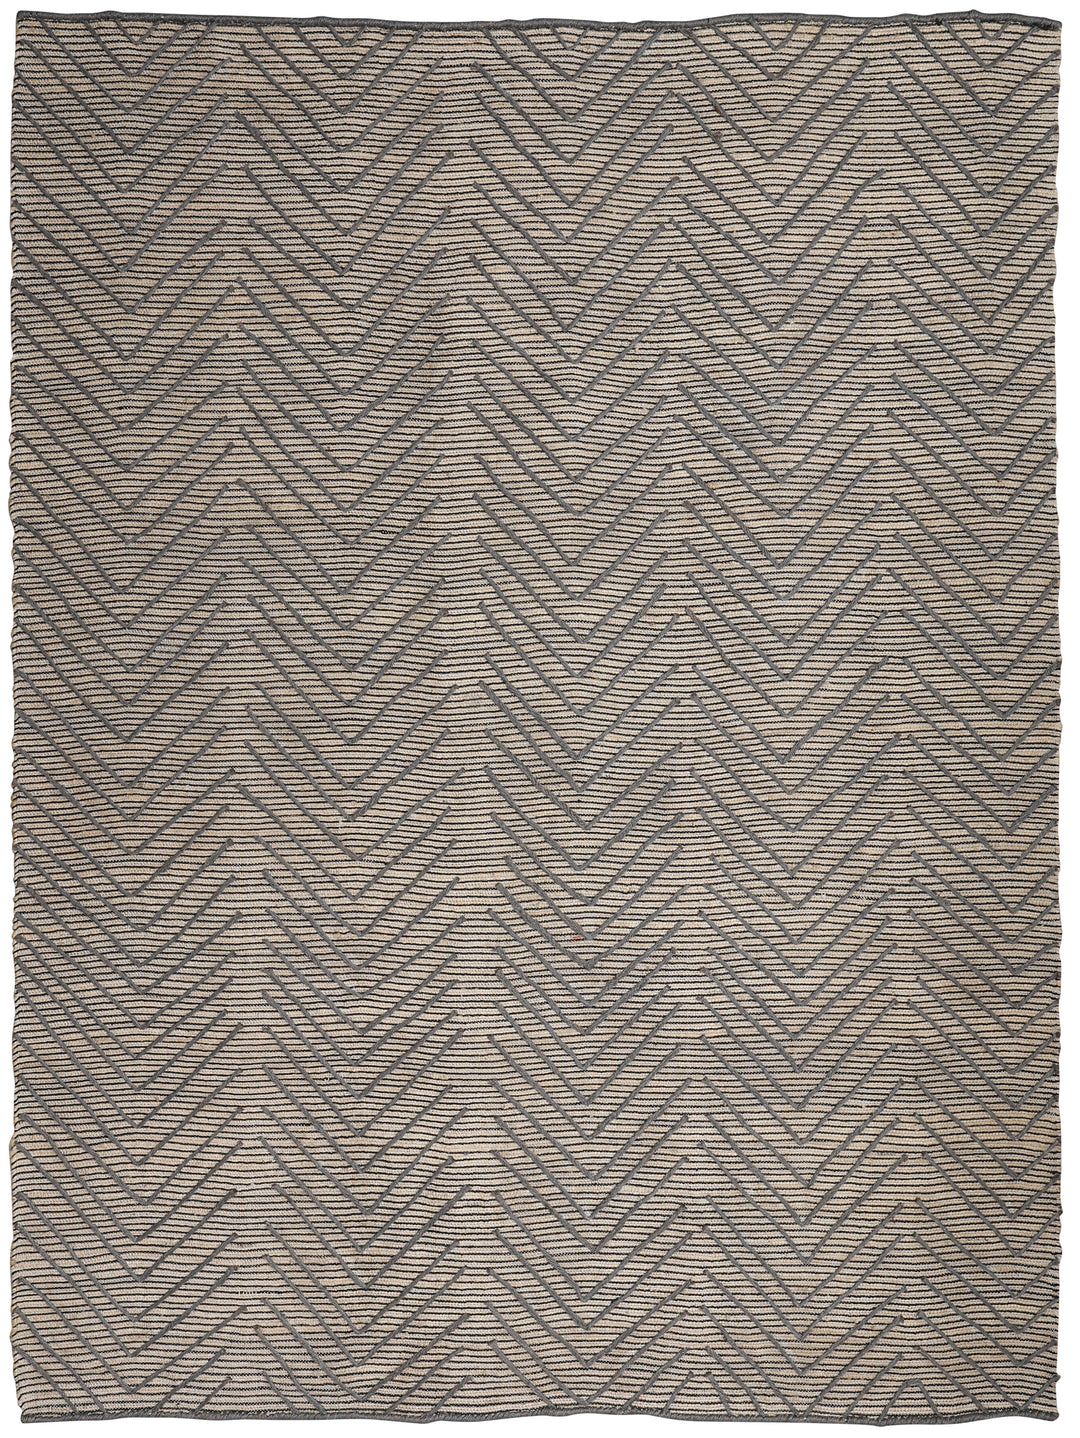 Amity Rug in Graphite